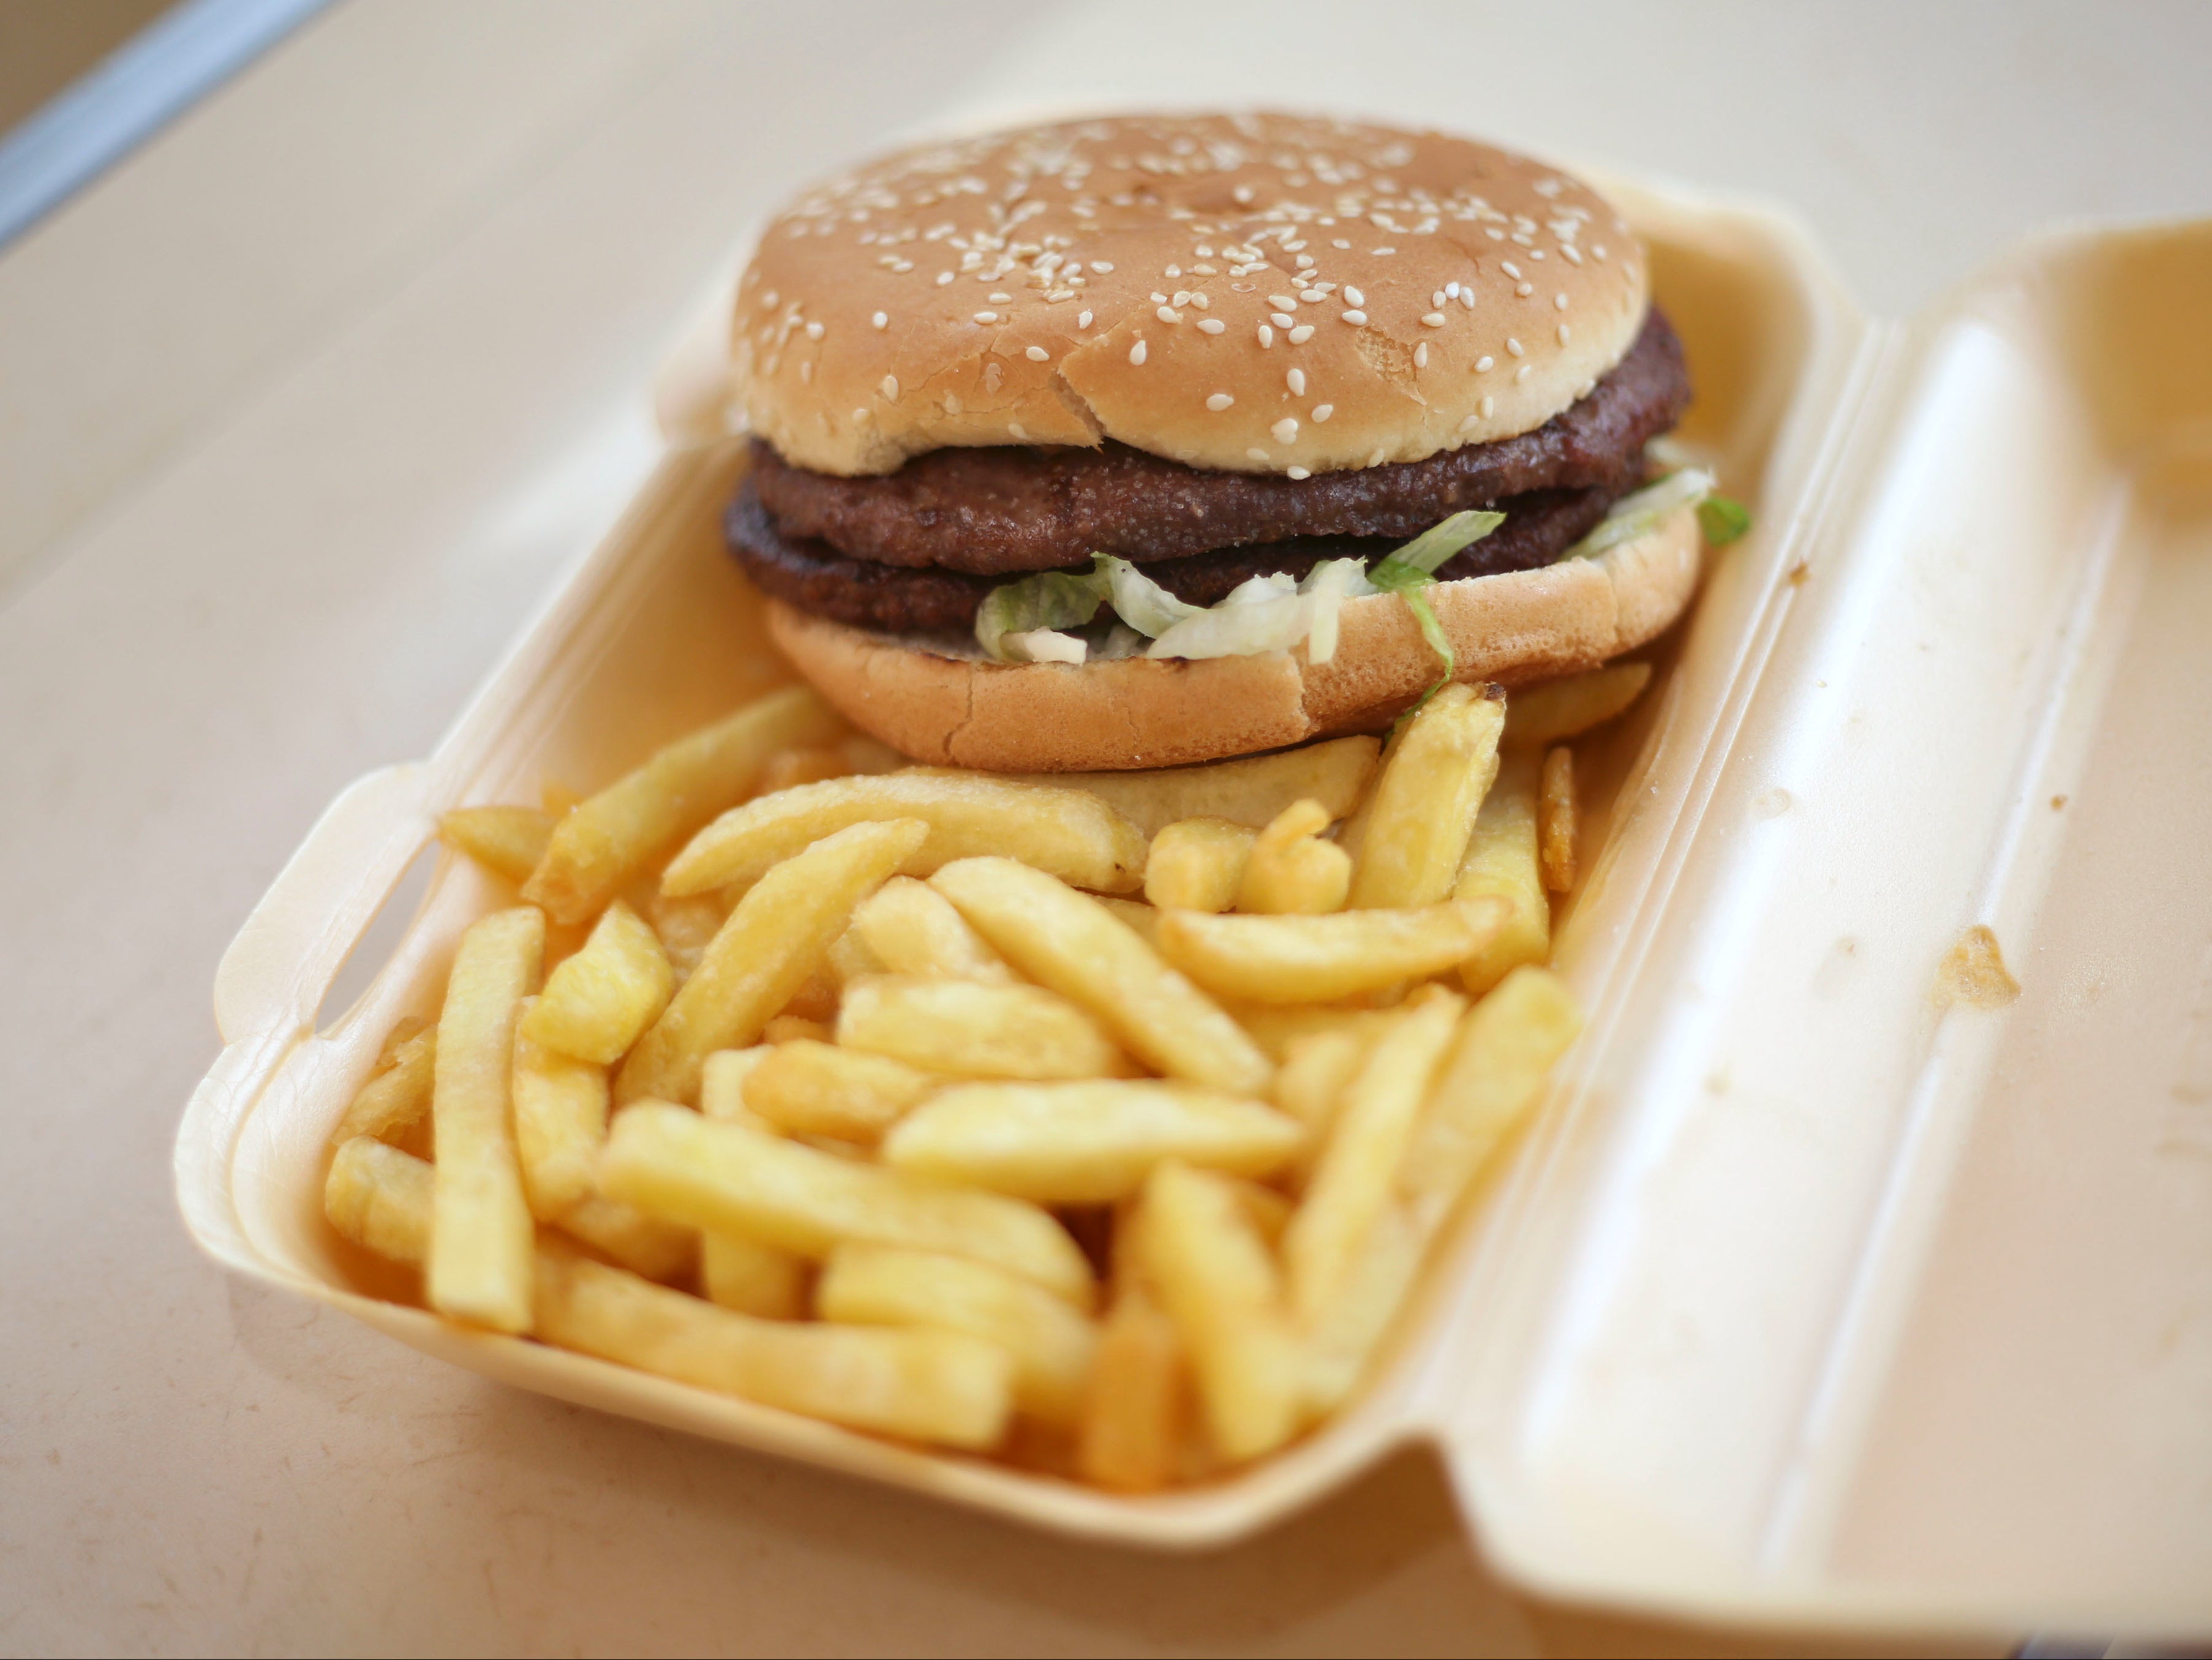 Government accused of failing to act on junk food